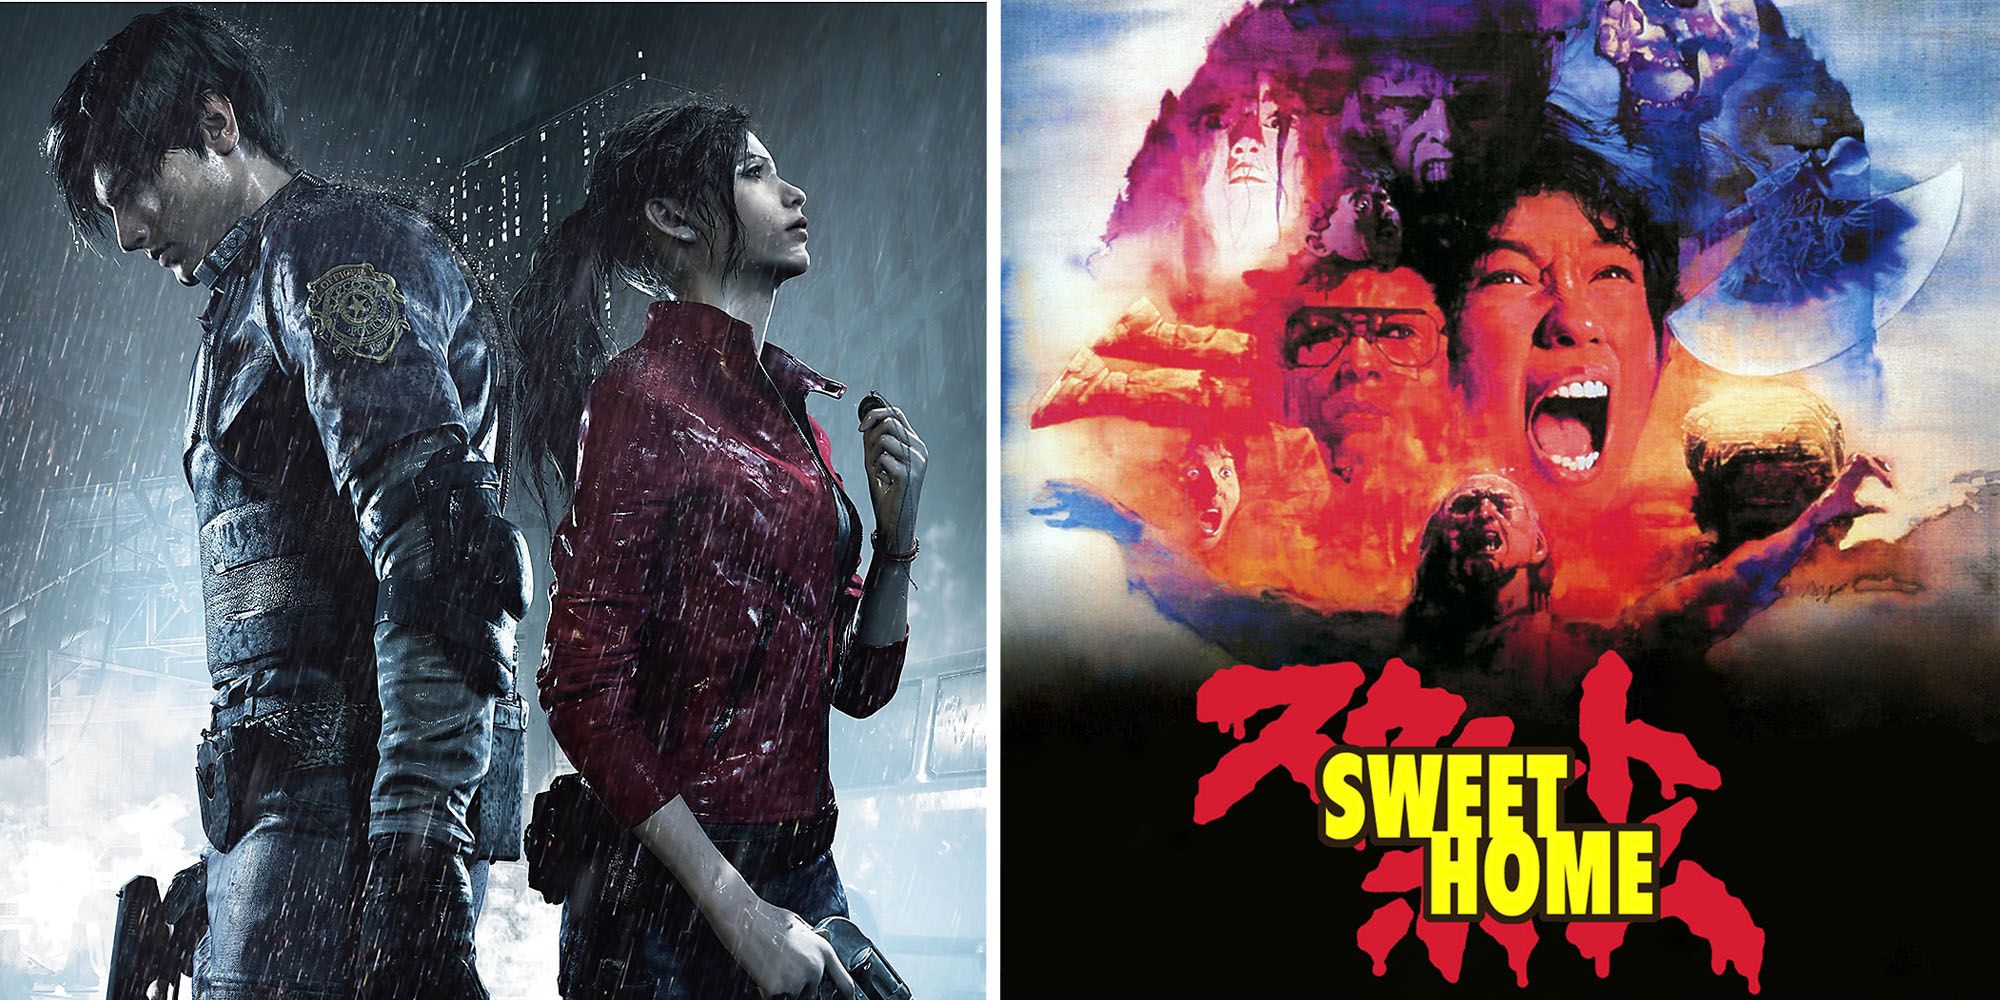 Resident Evil and poster for Sweet Home